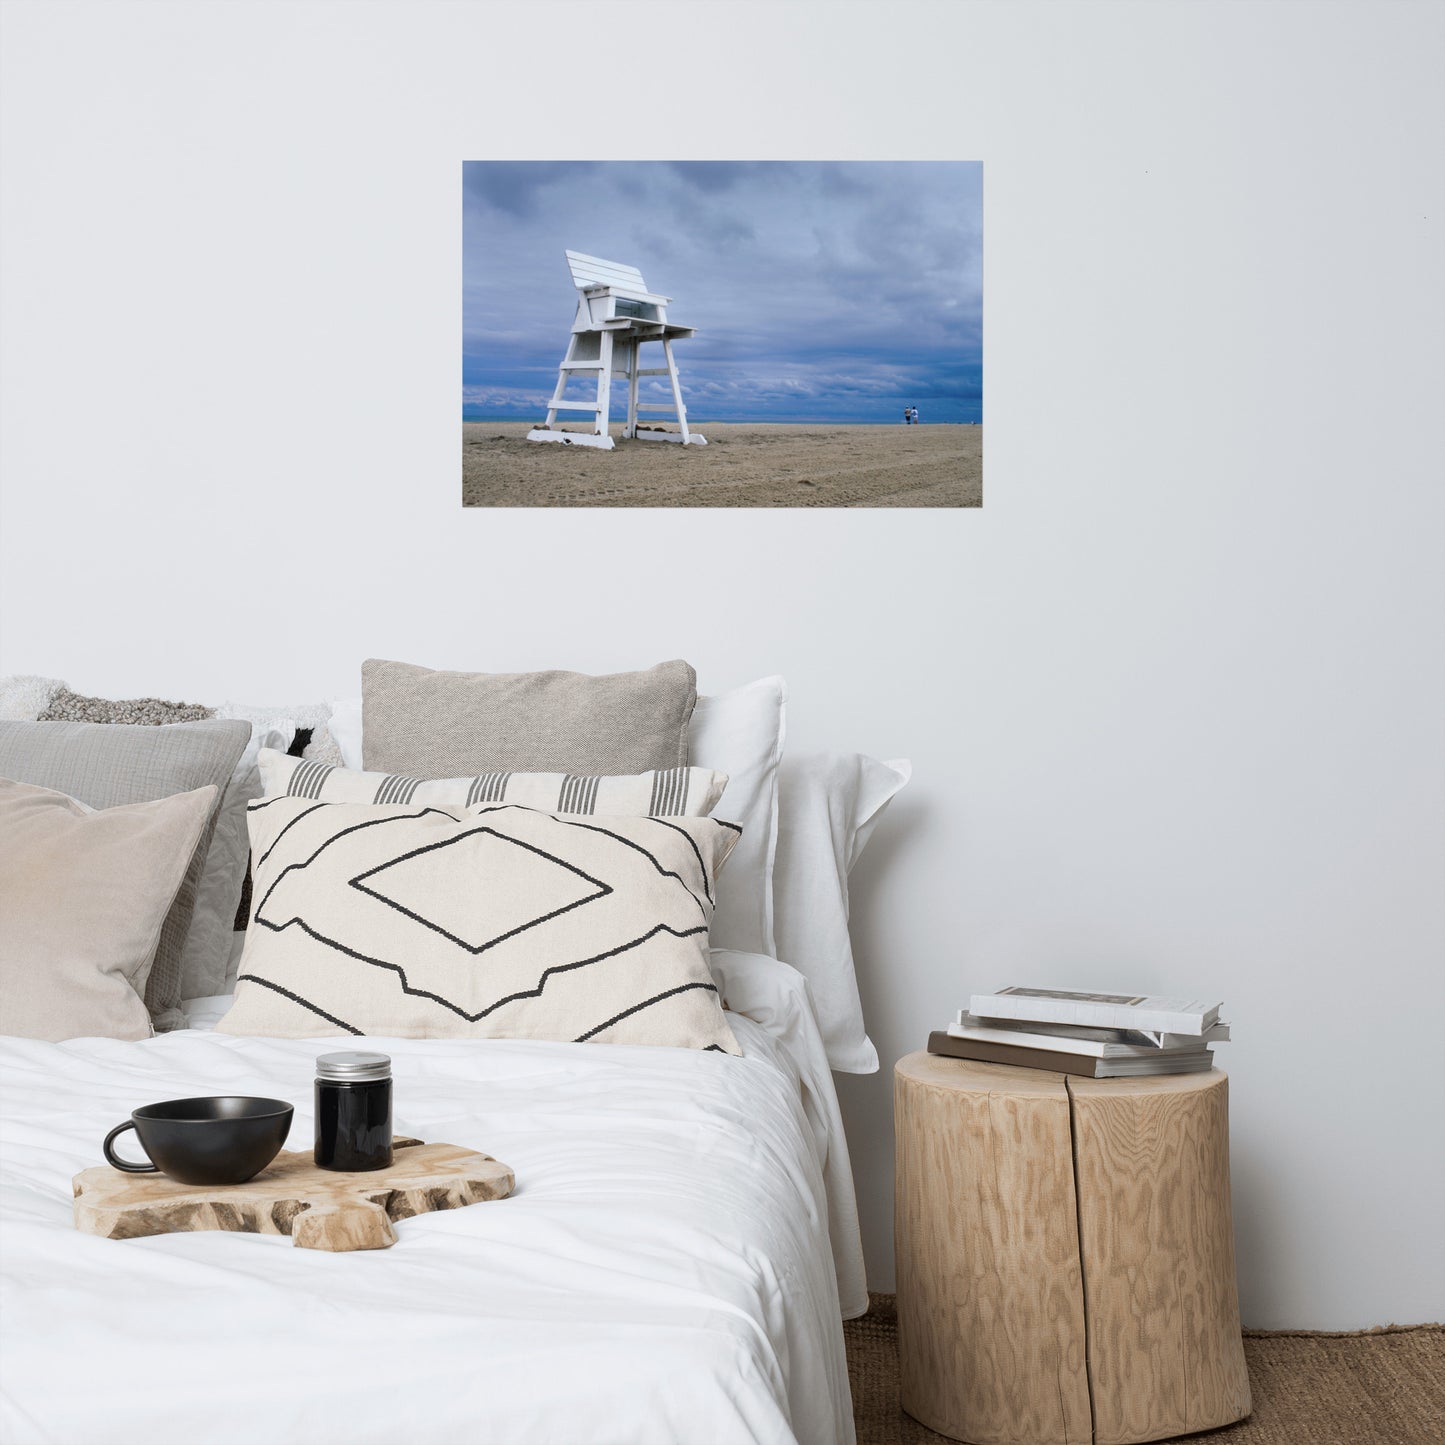 Bedroom Above Bed Wall Decor: Stormy Skies - Beach / Coastal / Seascape Nature / Landscape Photograph Loose / Unframed Wall Art Print - Artwork